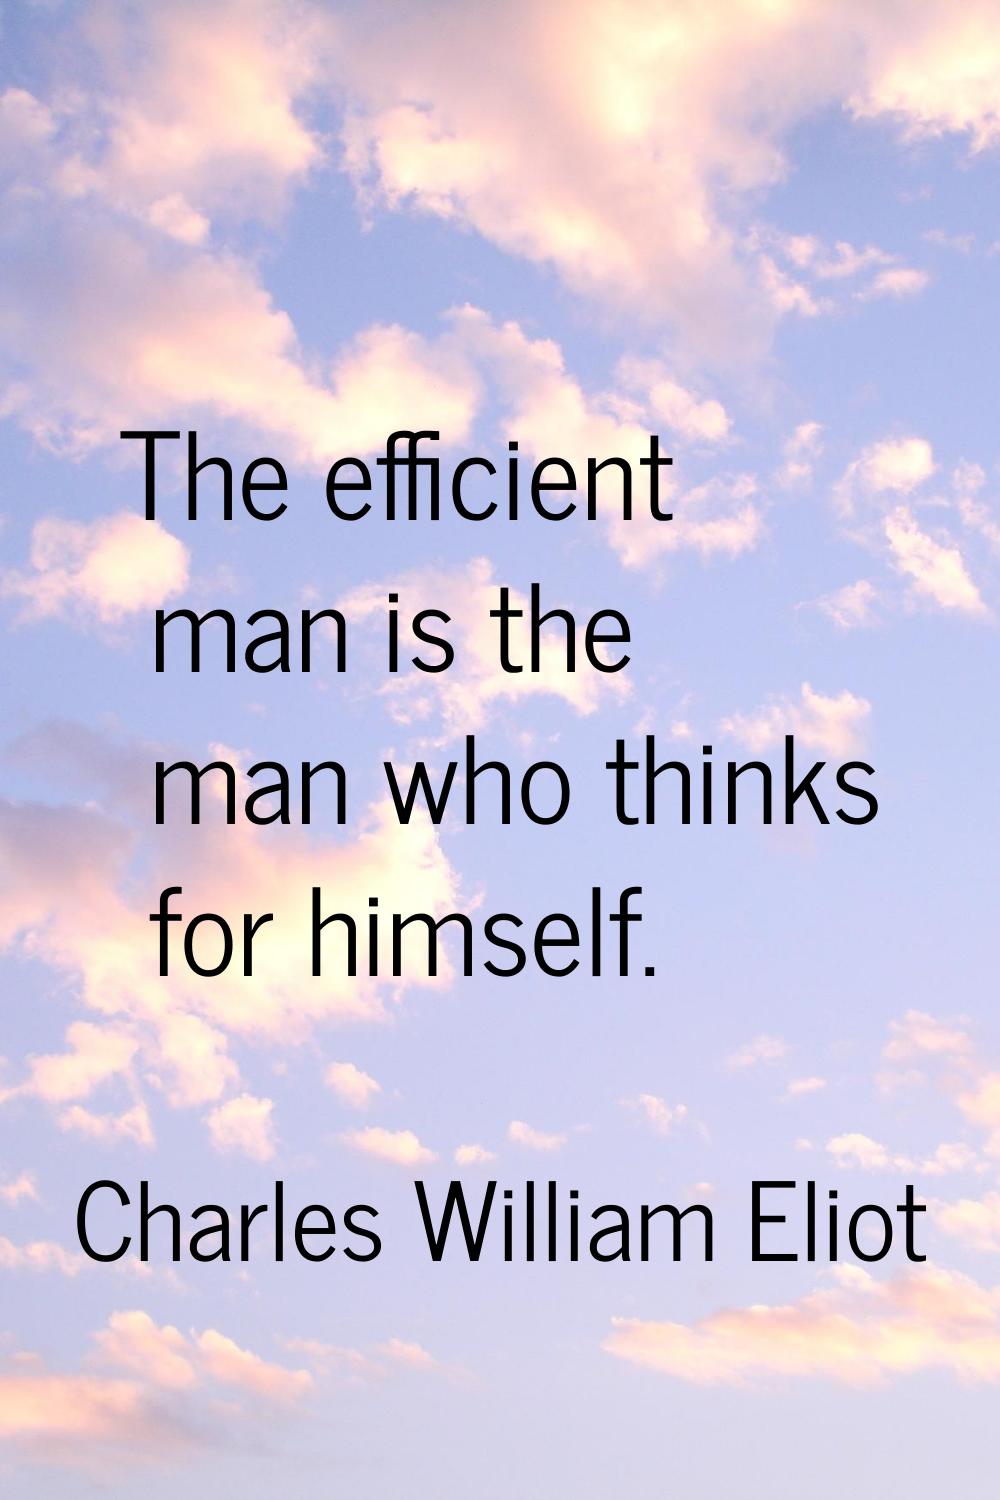 The efficient man is the man who thinks for himself.